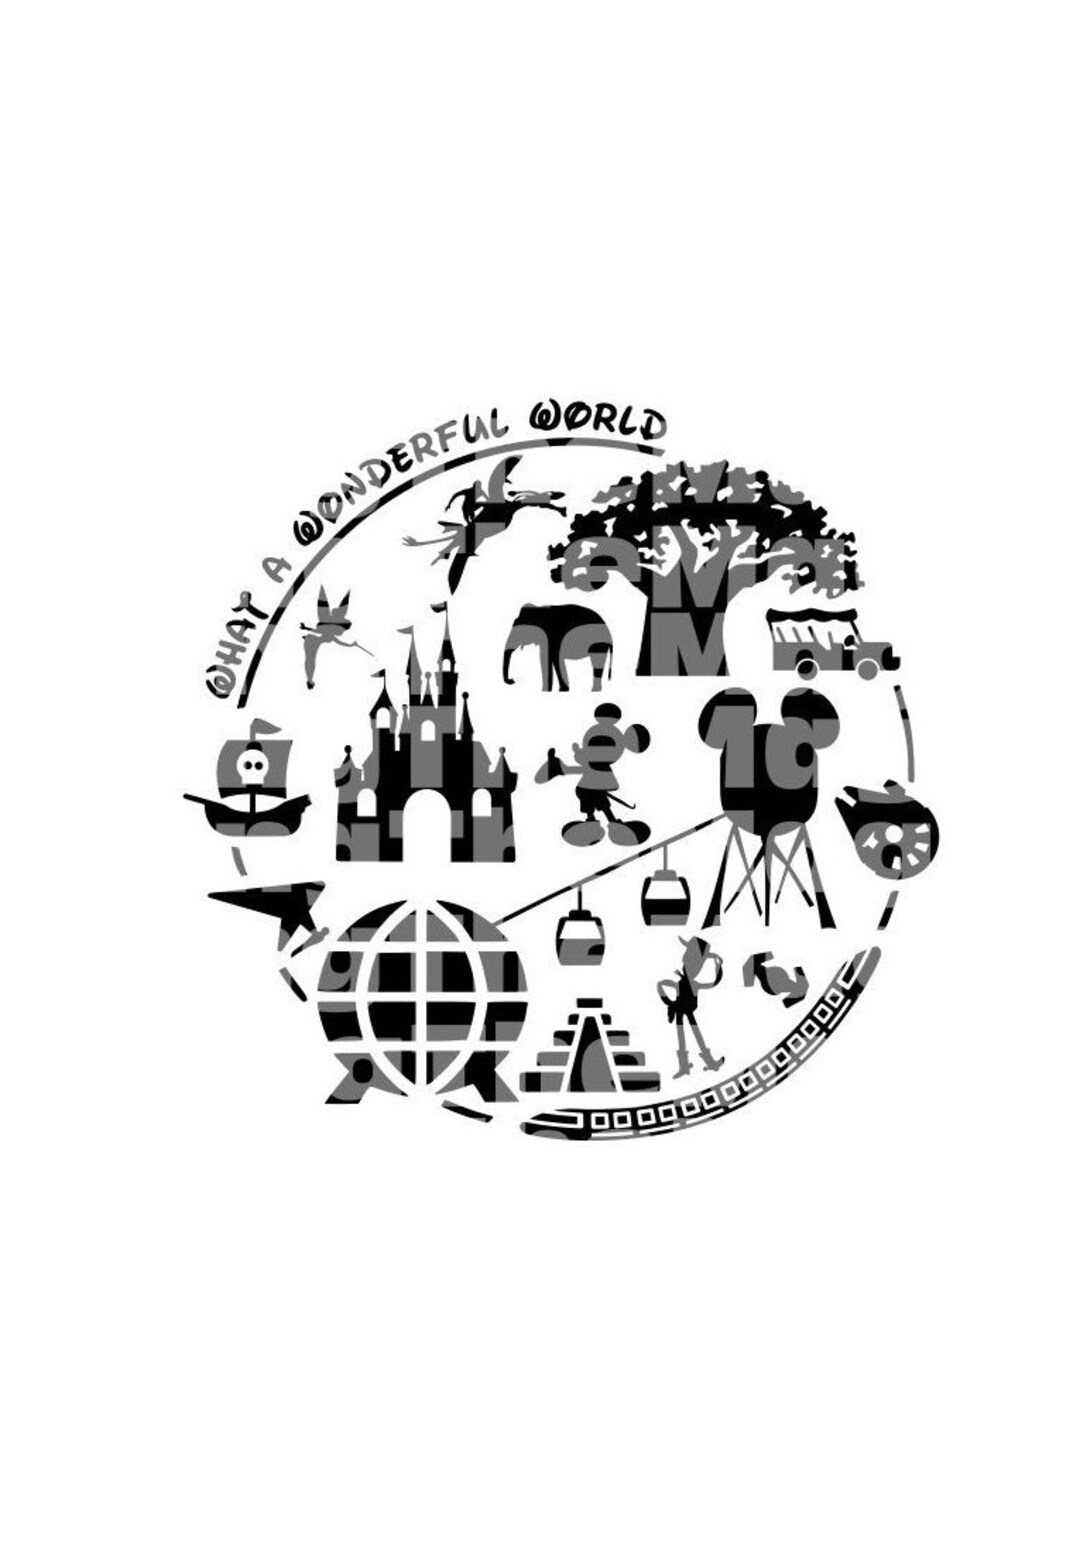 Here for the Arts, Here for the Crafts, Couples Art Festival DIY Tshirt  Design, Theme Park Vacation, Svg-png-dxf-pdf 